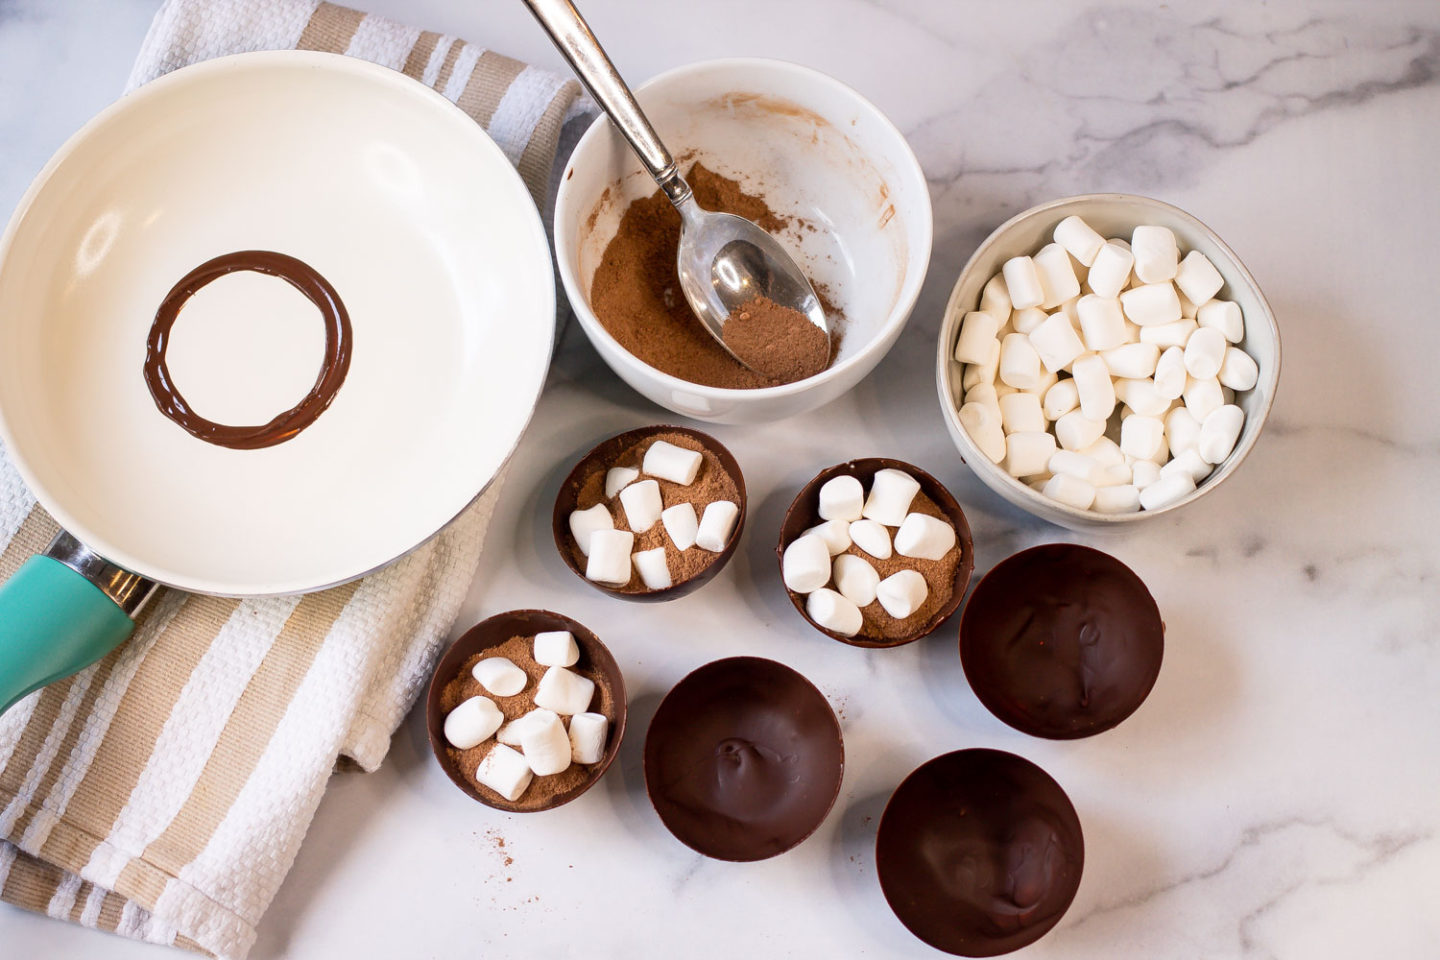 Chocolate Mold Halves filled with hot cocoa mix and mini marshmallows with a hot skillet and a bowl of hot cocoa mix